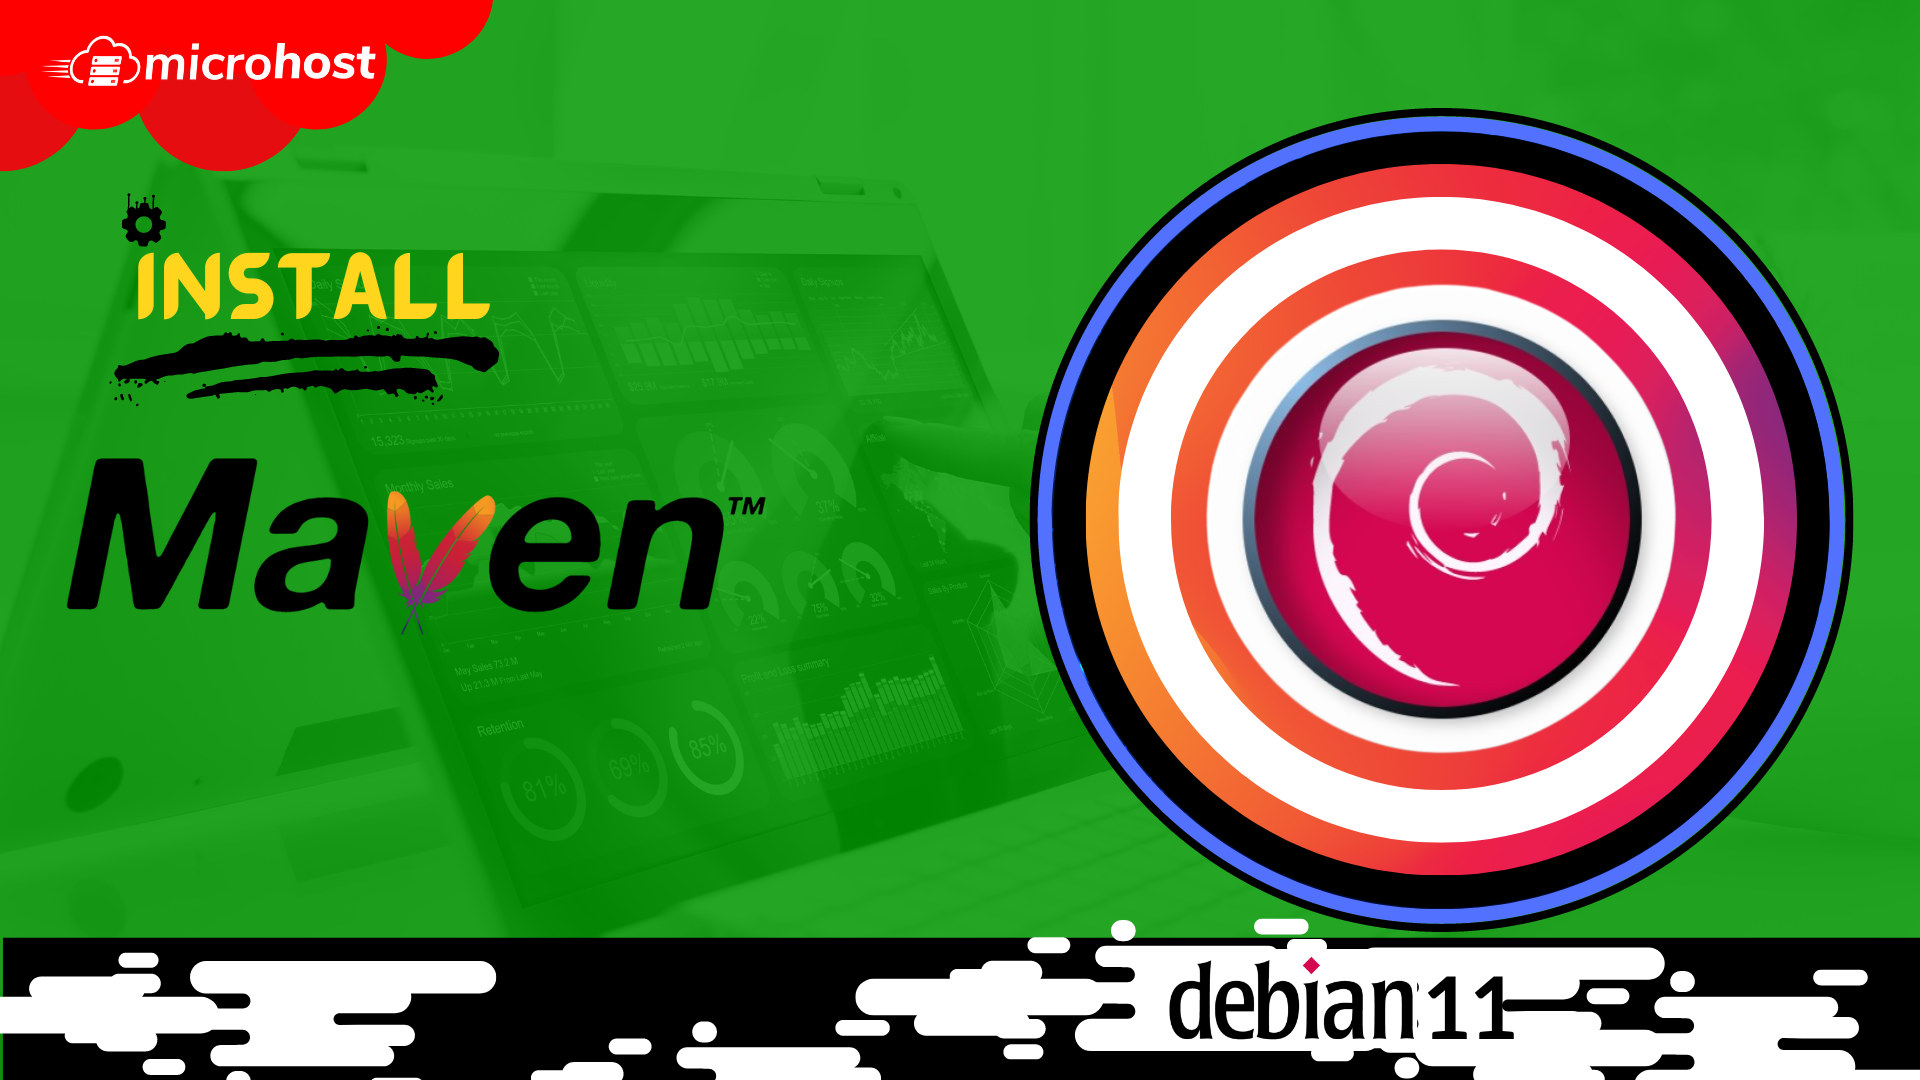 How to install Maven on Debian